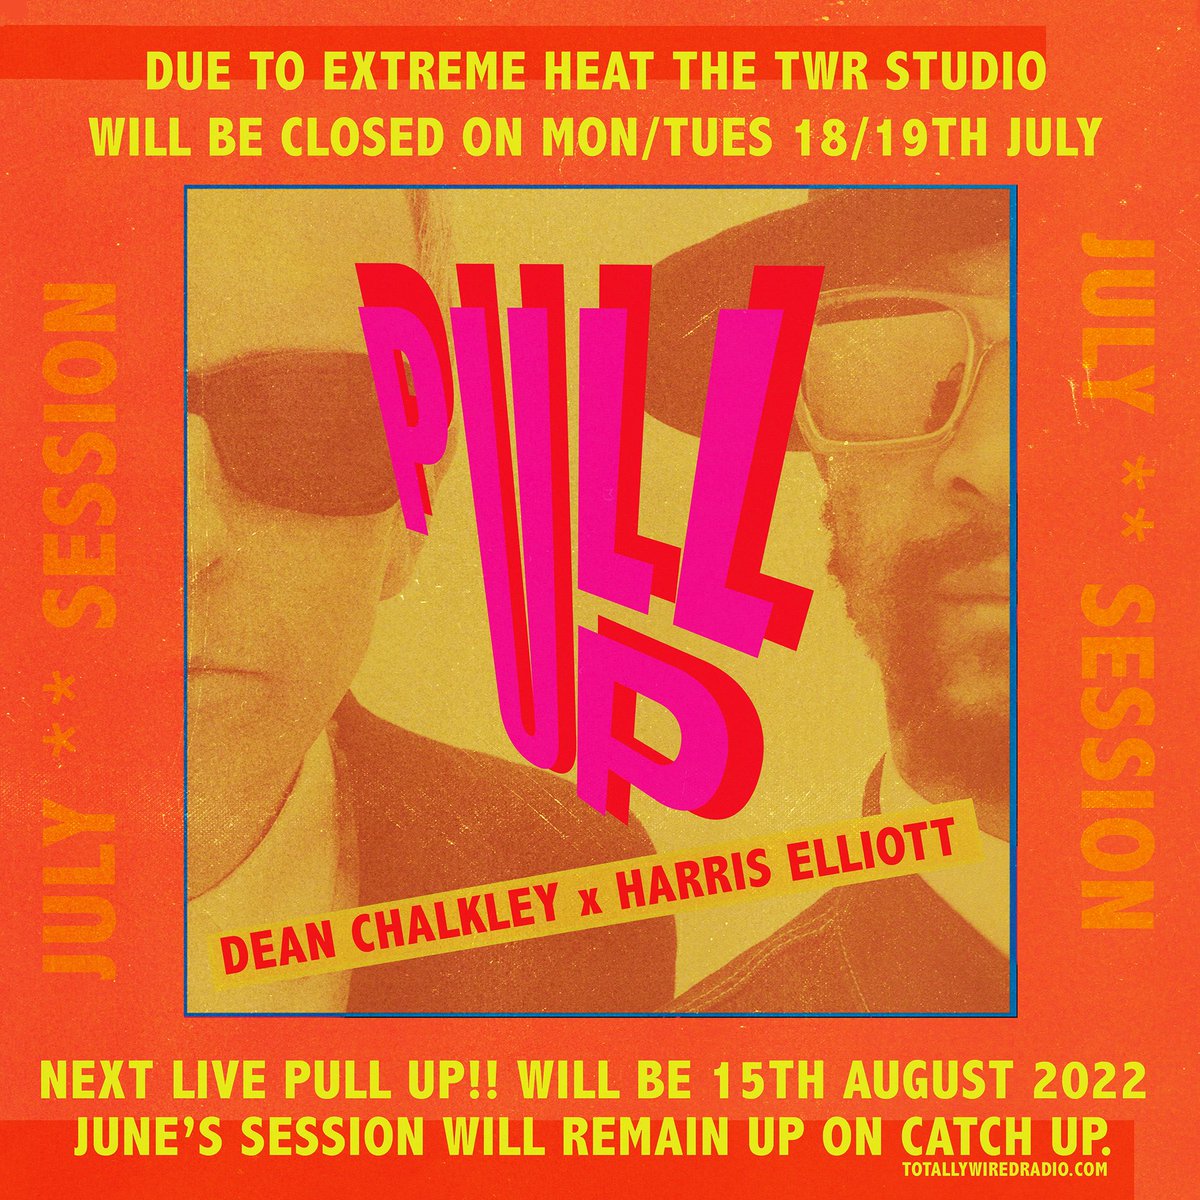 Due to the extreme heat conditions the TWR studios will be closed on Monday & Tuesday so we can’t do our planned monthly PULL UP!! Still last months slice of sonic will remain up on the ‘Catch Up’..take care out there & keep cool totallywiredradio.com/pull-up/